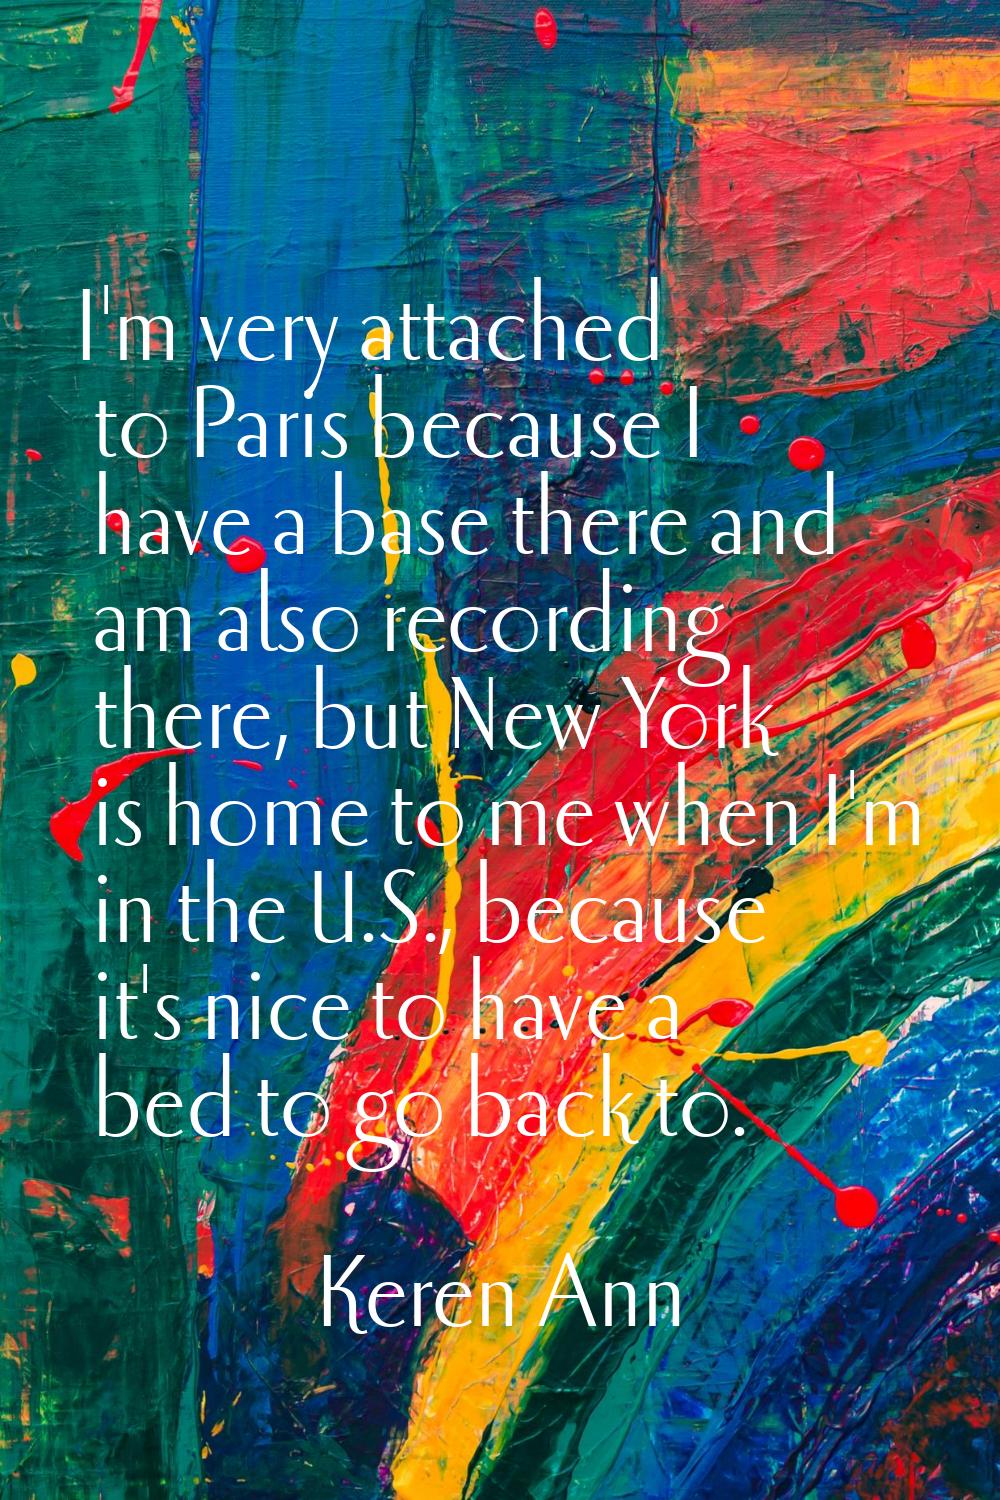 I'm very attached to Paris because I have a base there and am also recording there, but New York is